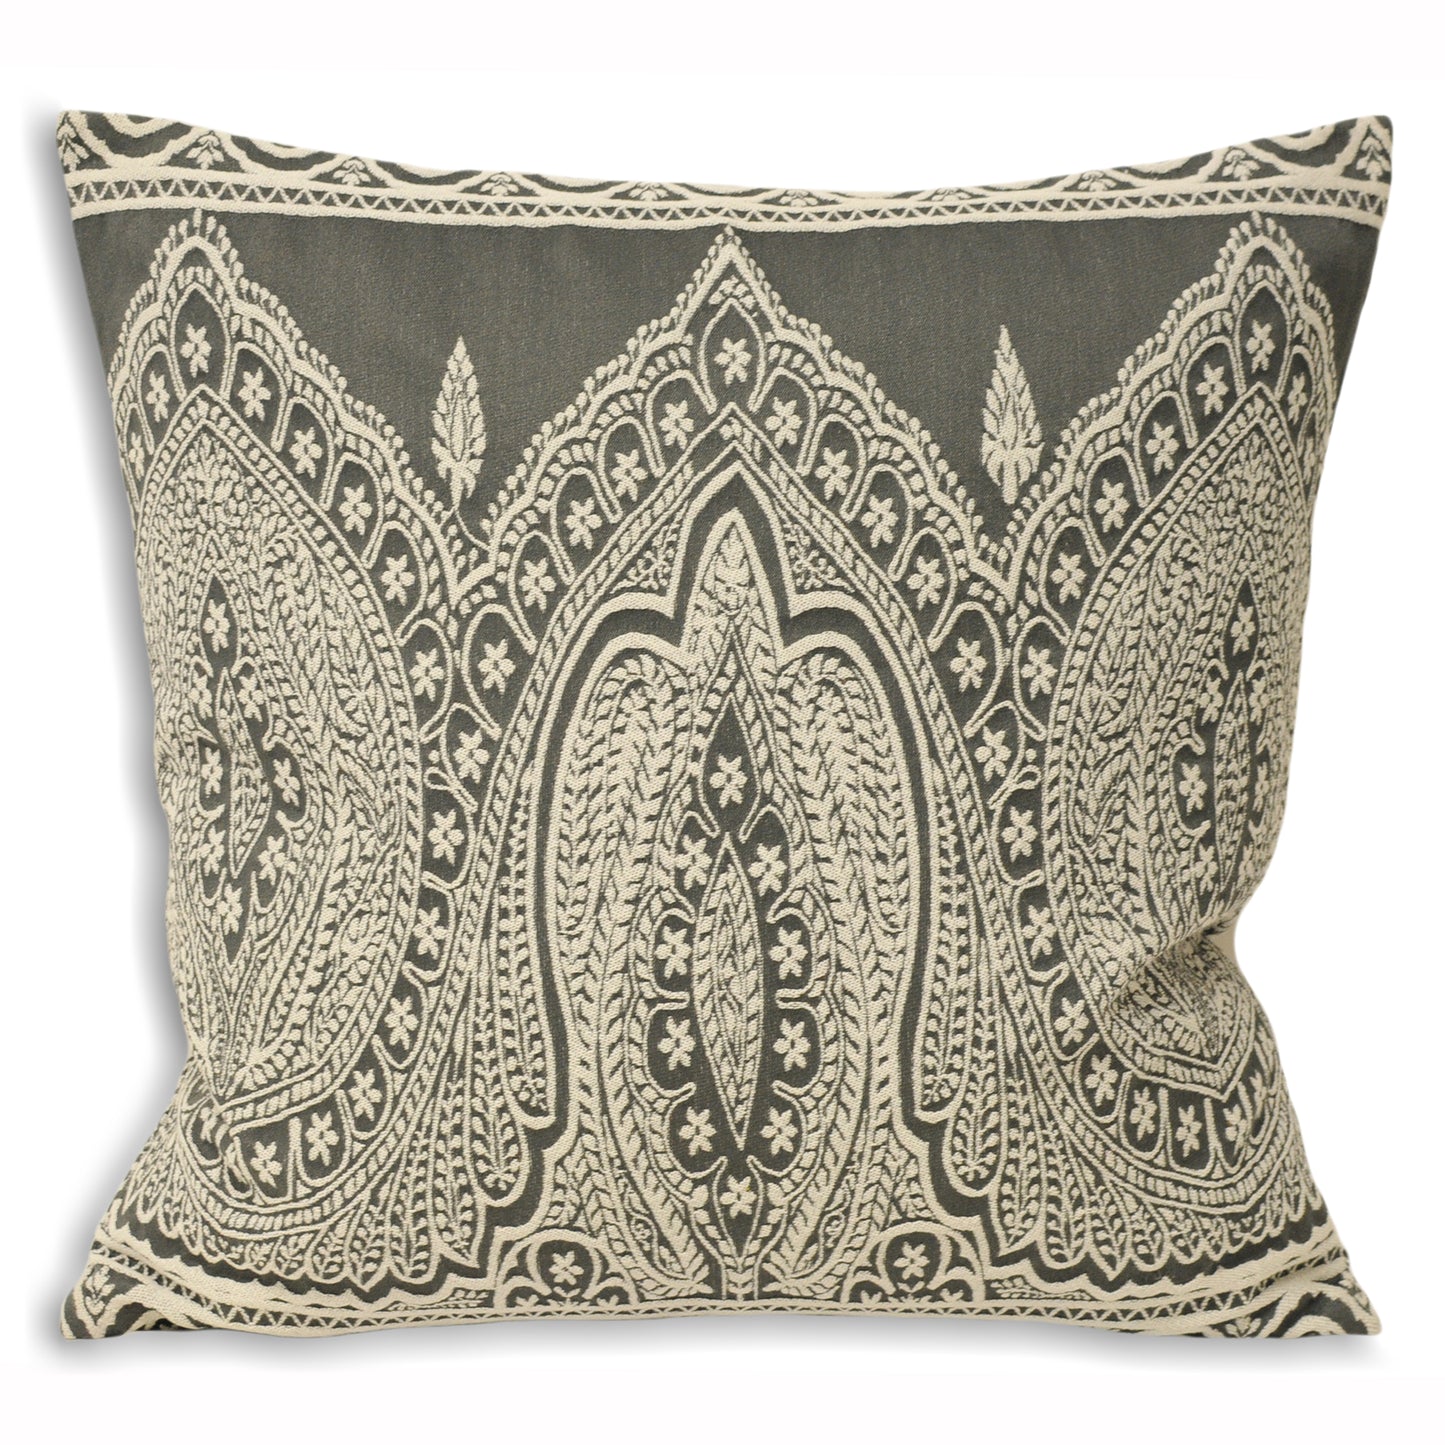 Decorative Indoor Cushion "Paisley" - ON SALE NOW!